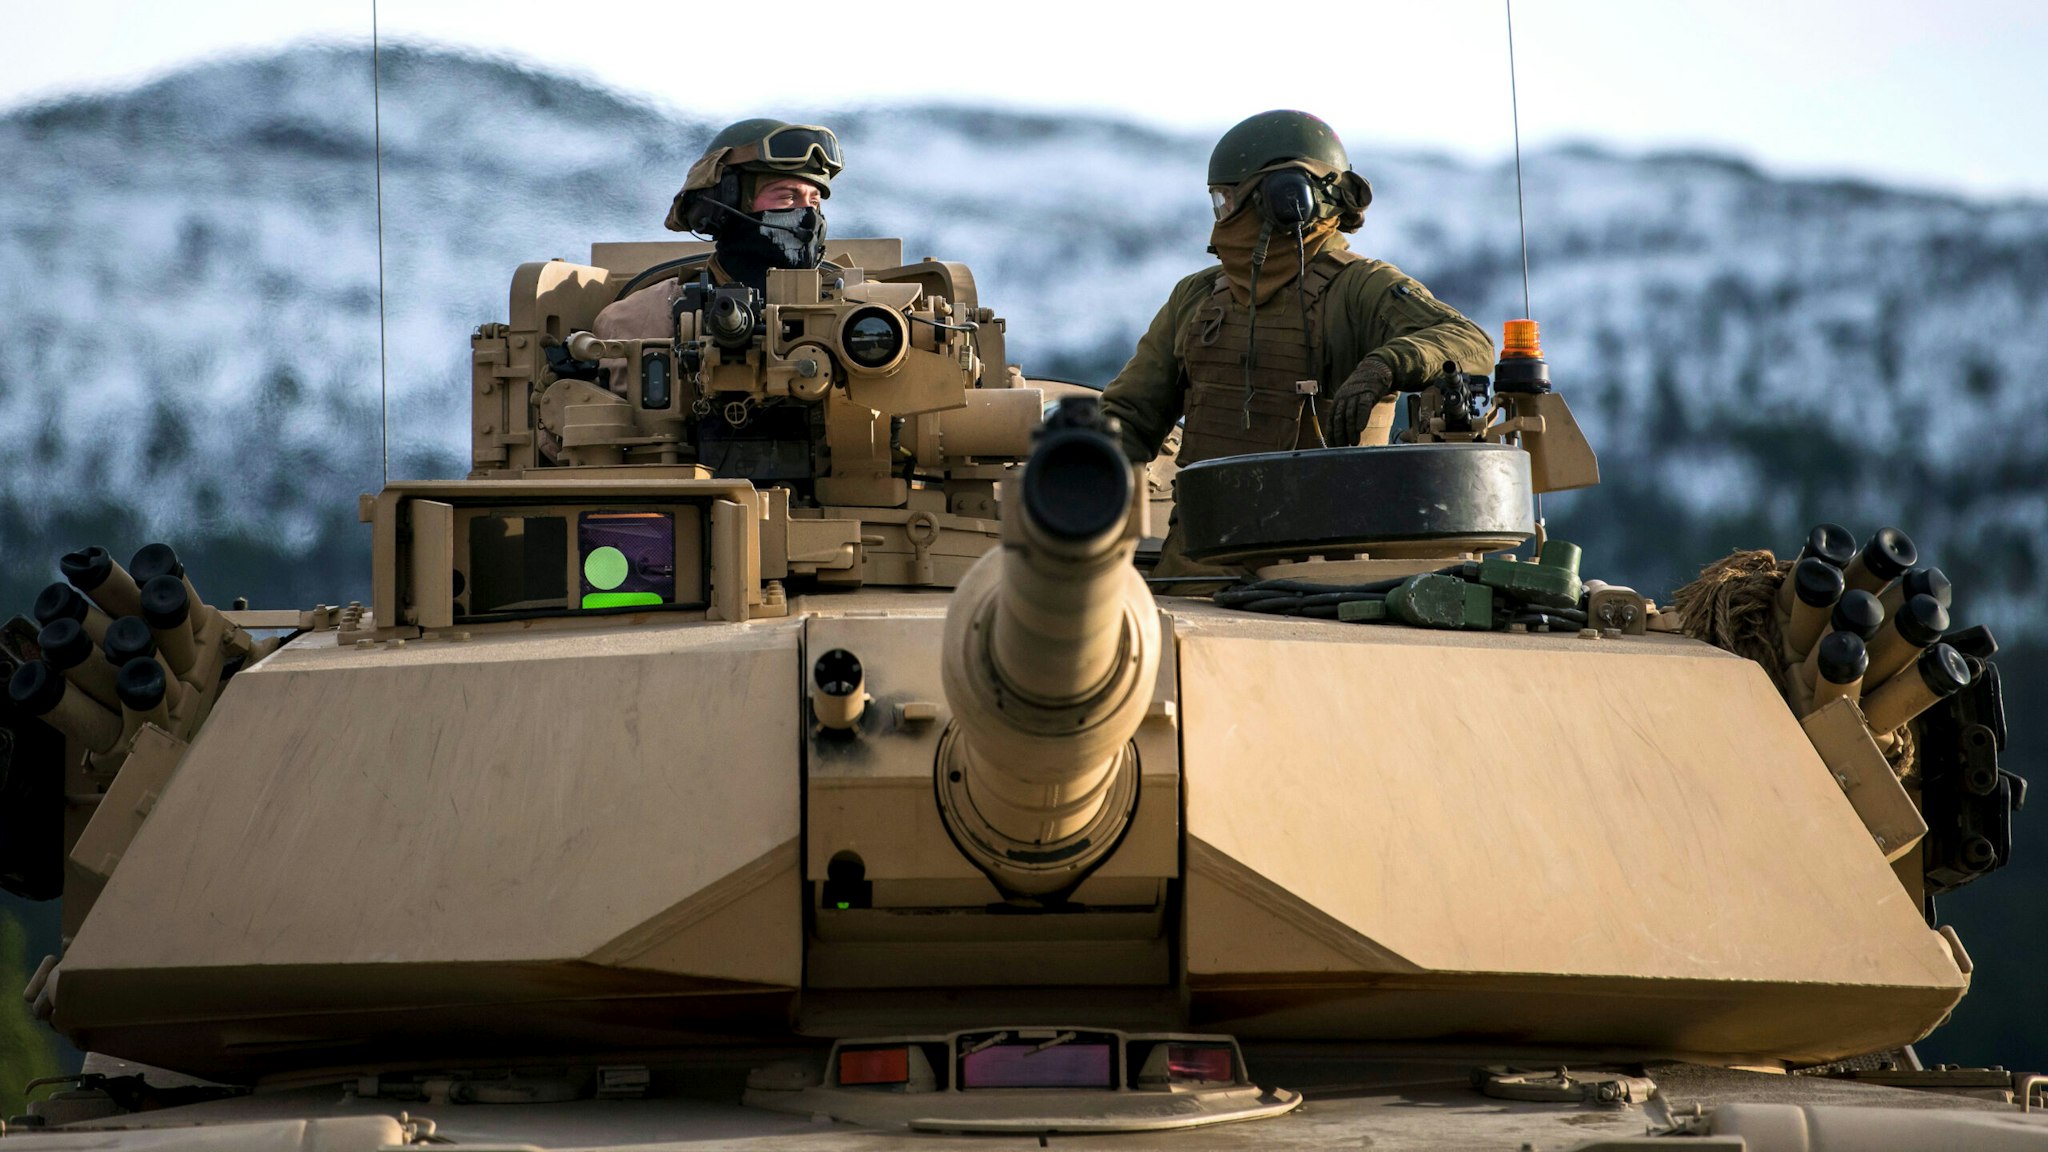 US Marines drive an M1 Abrams to take part in an exercise to capture an airfield as part of the Trident Juncture 2018, a NATO-led military exercise, on November 1, 2018 near the town of Oppdal, Norway. - Trident Juncture 2018, is a NATO-led military exercise held in Norway from 25 October to 7 November 2018. The exercise is the largest of its kind in Norway since the 1980s. Around 50,000 participants from NATO and partner countries, some 250 aircraft, 65 ships and up to 10,000 vehicles take part in the exercise. The main goal of Trident Juncture is allegedly to train the NATO Response Force and to test the alliance's defence capability.